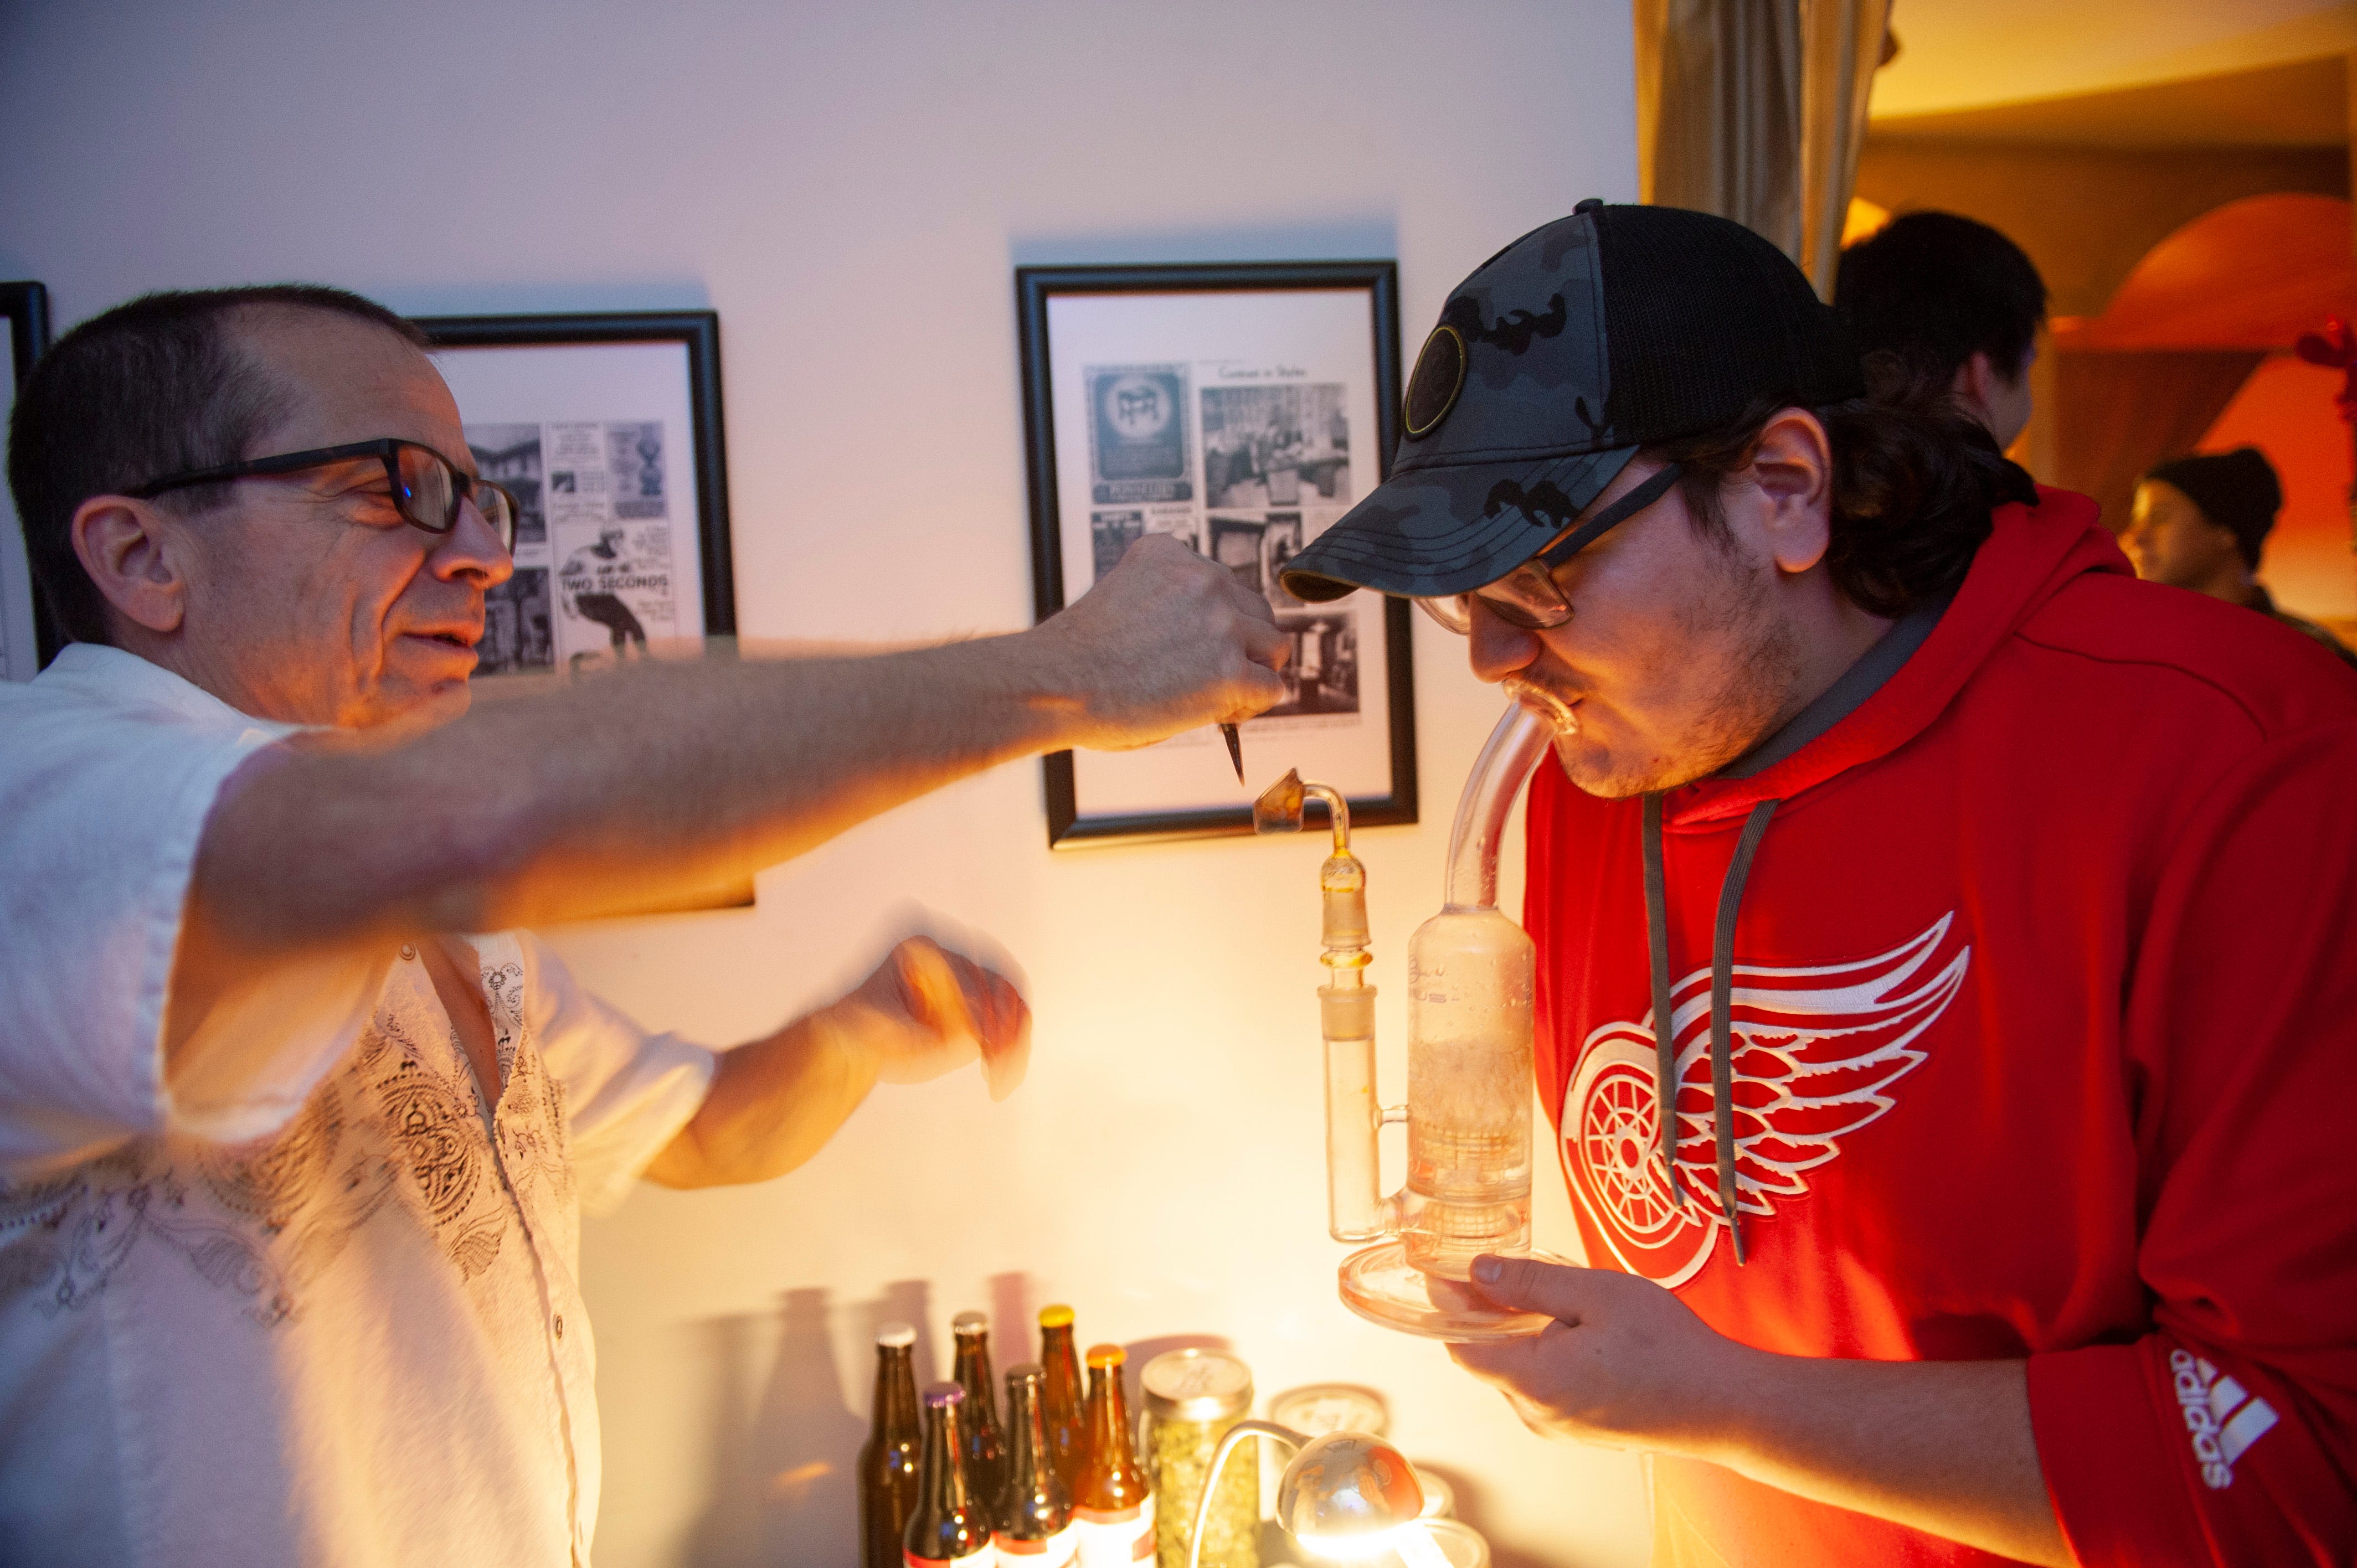 Cannabis entrepreneur Mike, left, offers a free "dab" to Peter of Oakland Township (both withheld their last names) during "The Art of Cannabis" event at the Cannabis Counsel in Detroit.